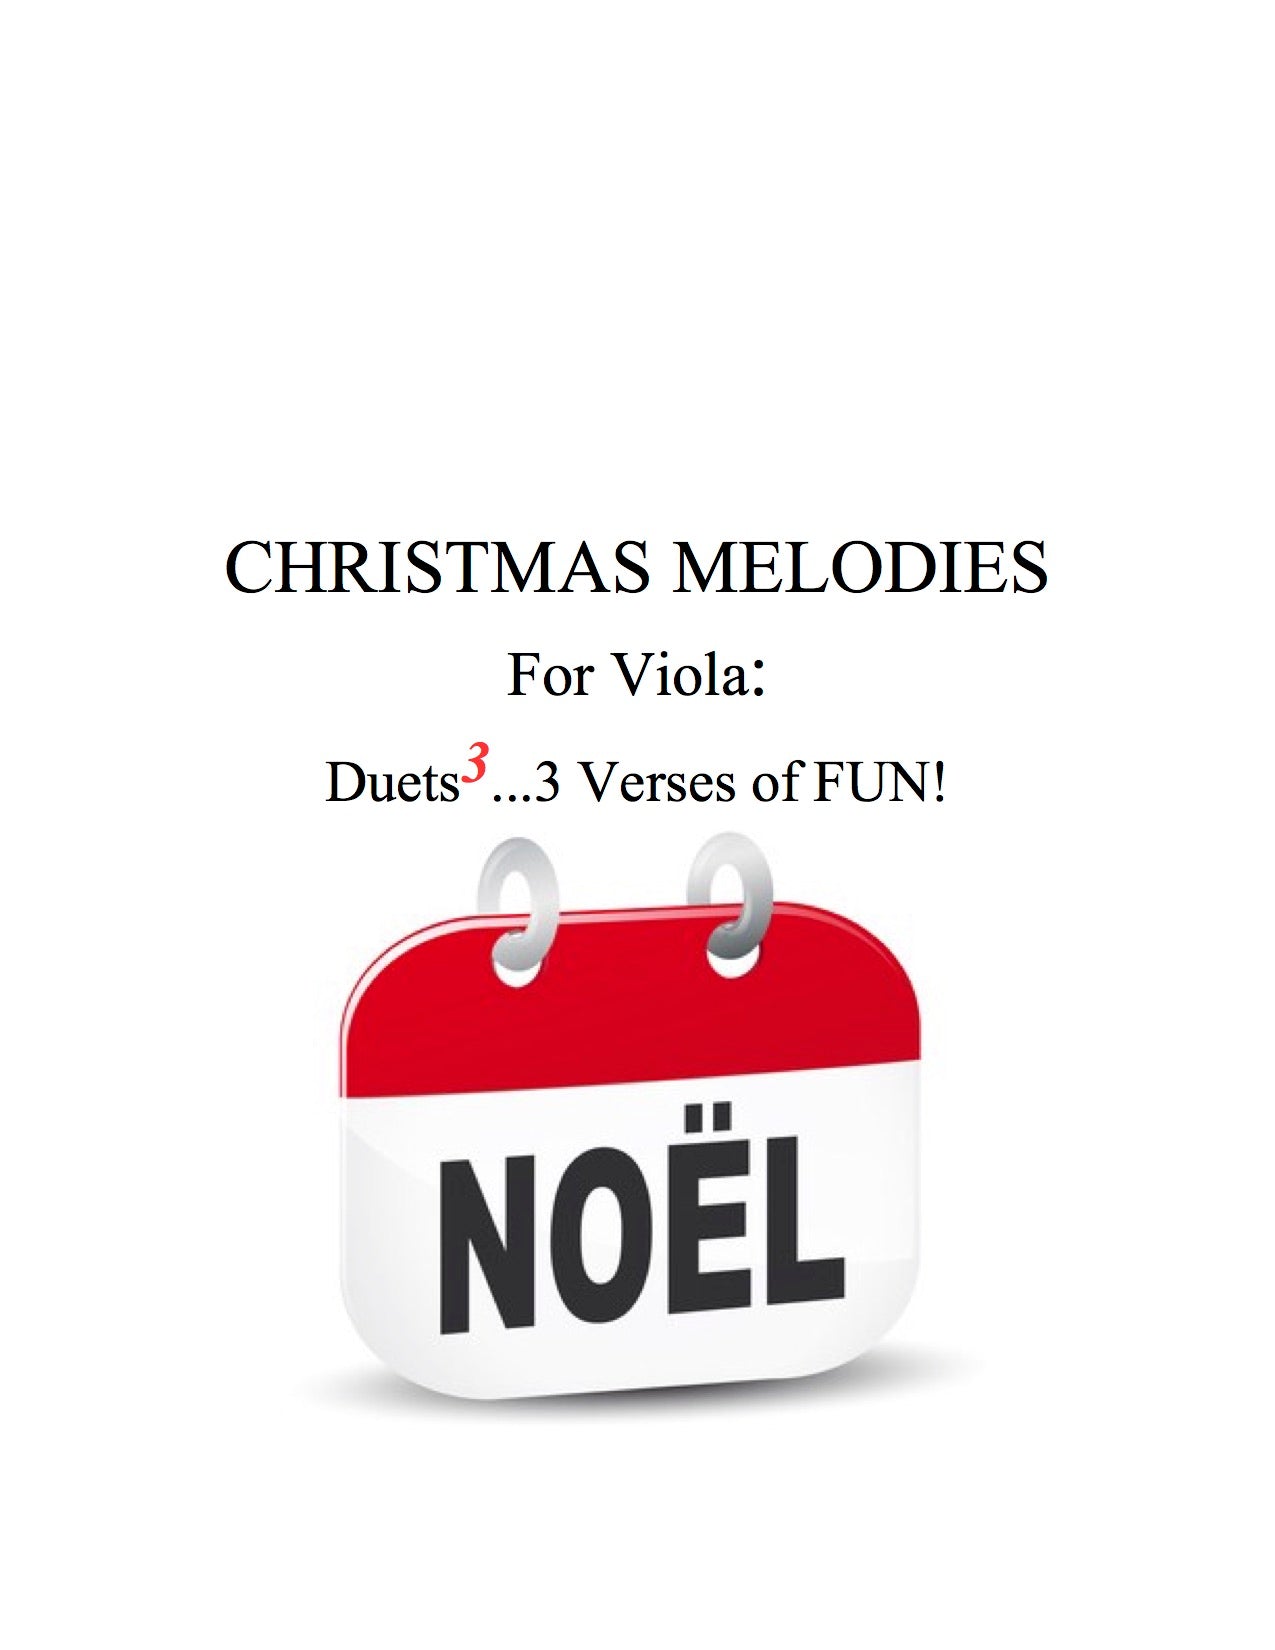 040 - Christmas Melodies For Viola: Duets to the 3rd Power...3 Verses of FUN!